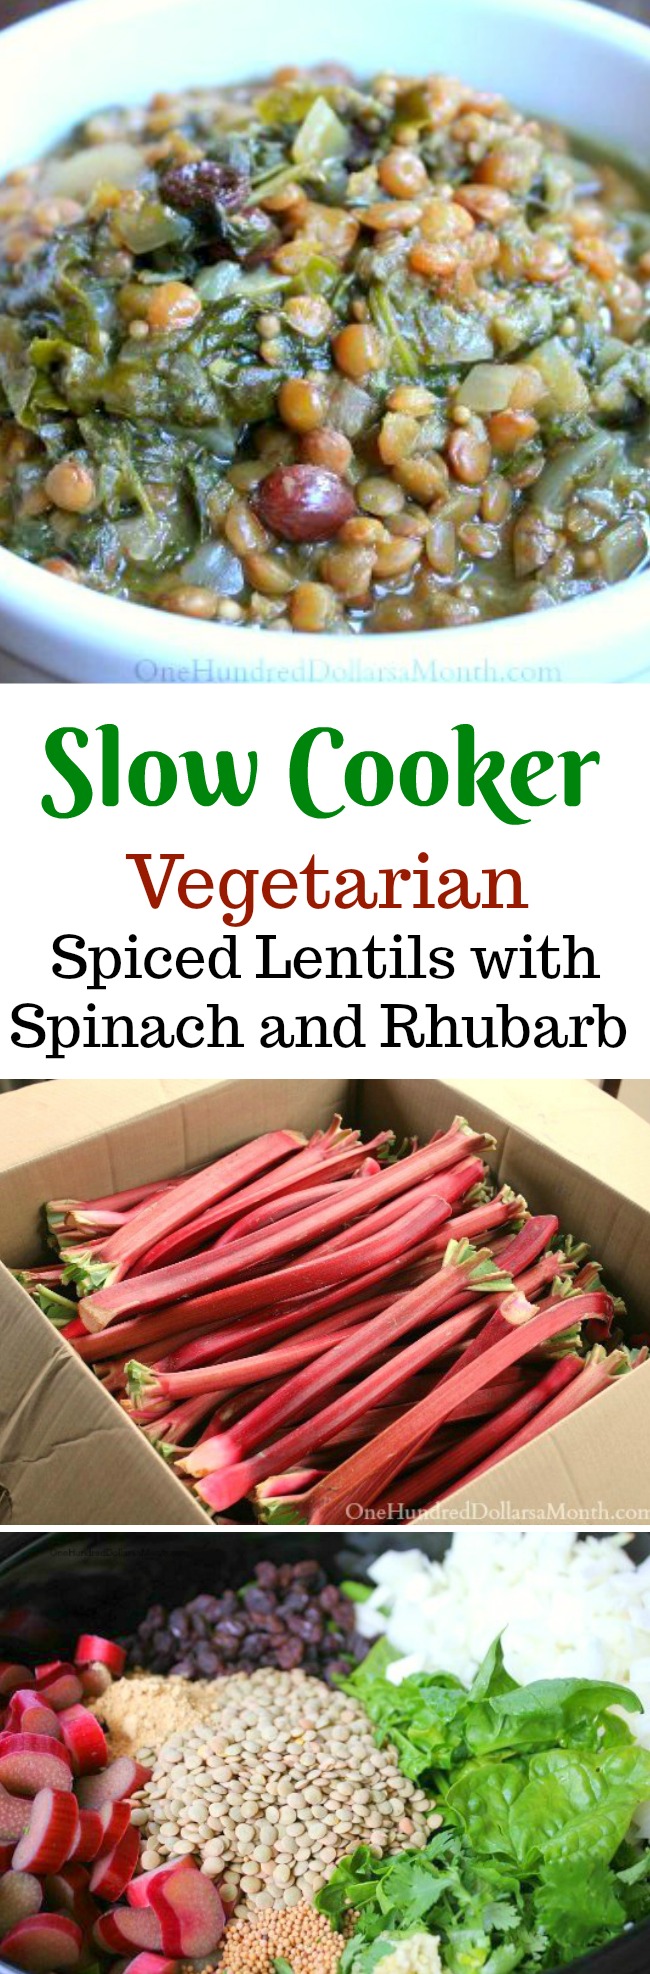 Slow Cooker Vegetarian Indian-Spiced Lentils with Spinach and Rhubarb